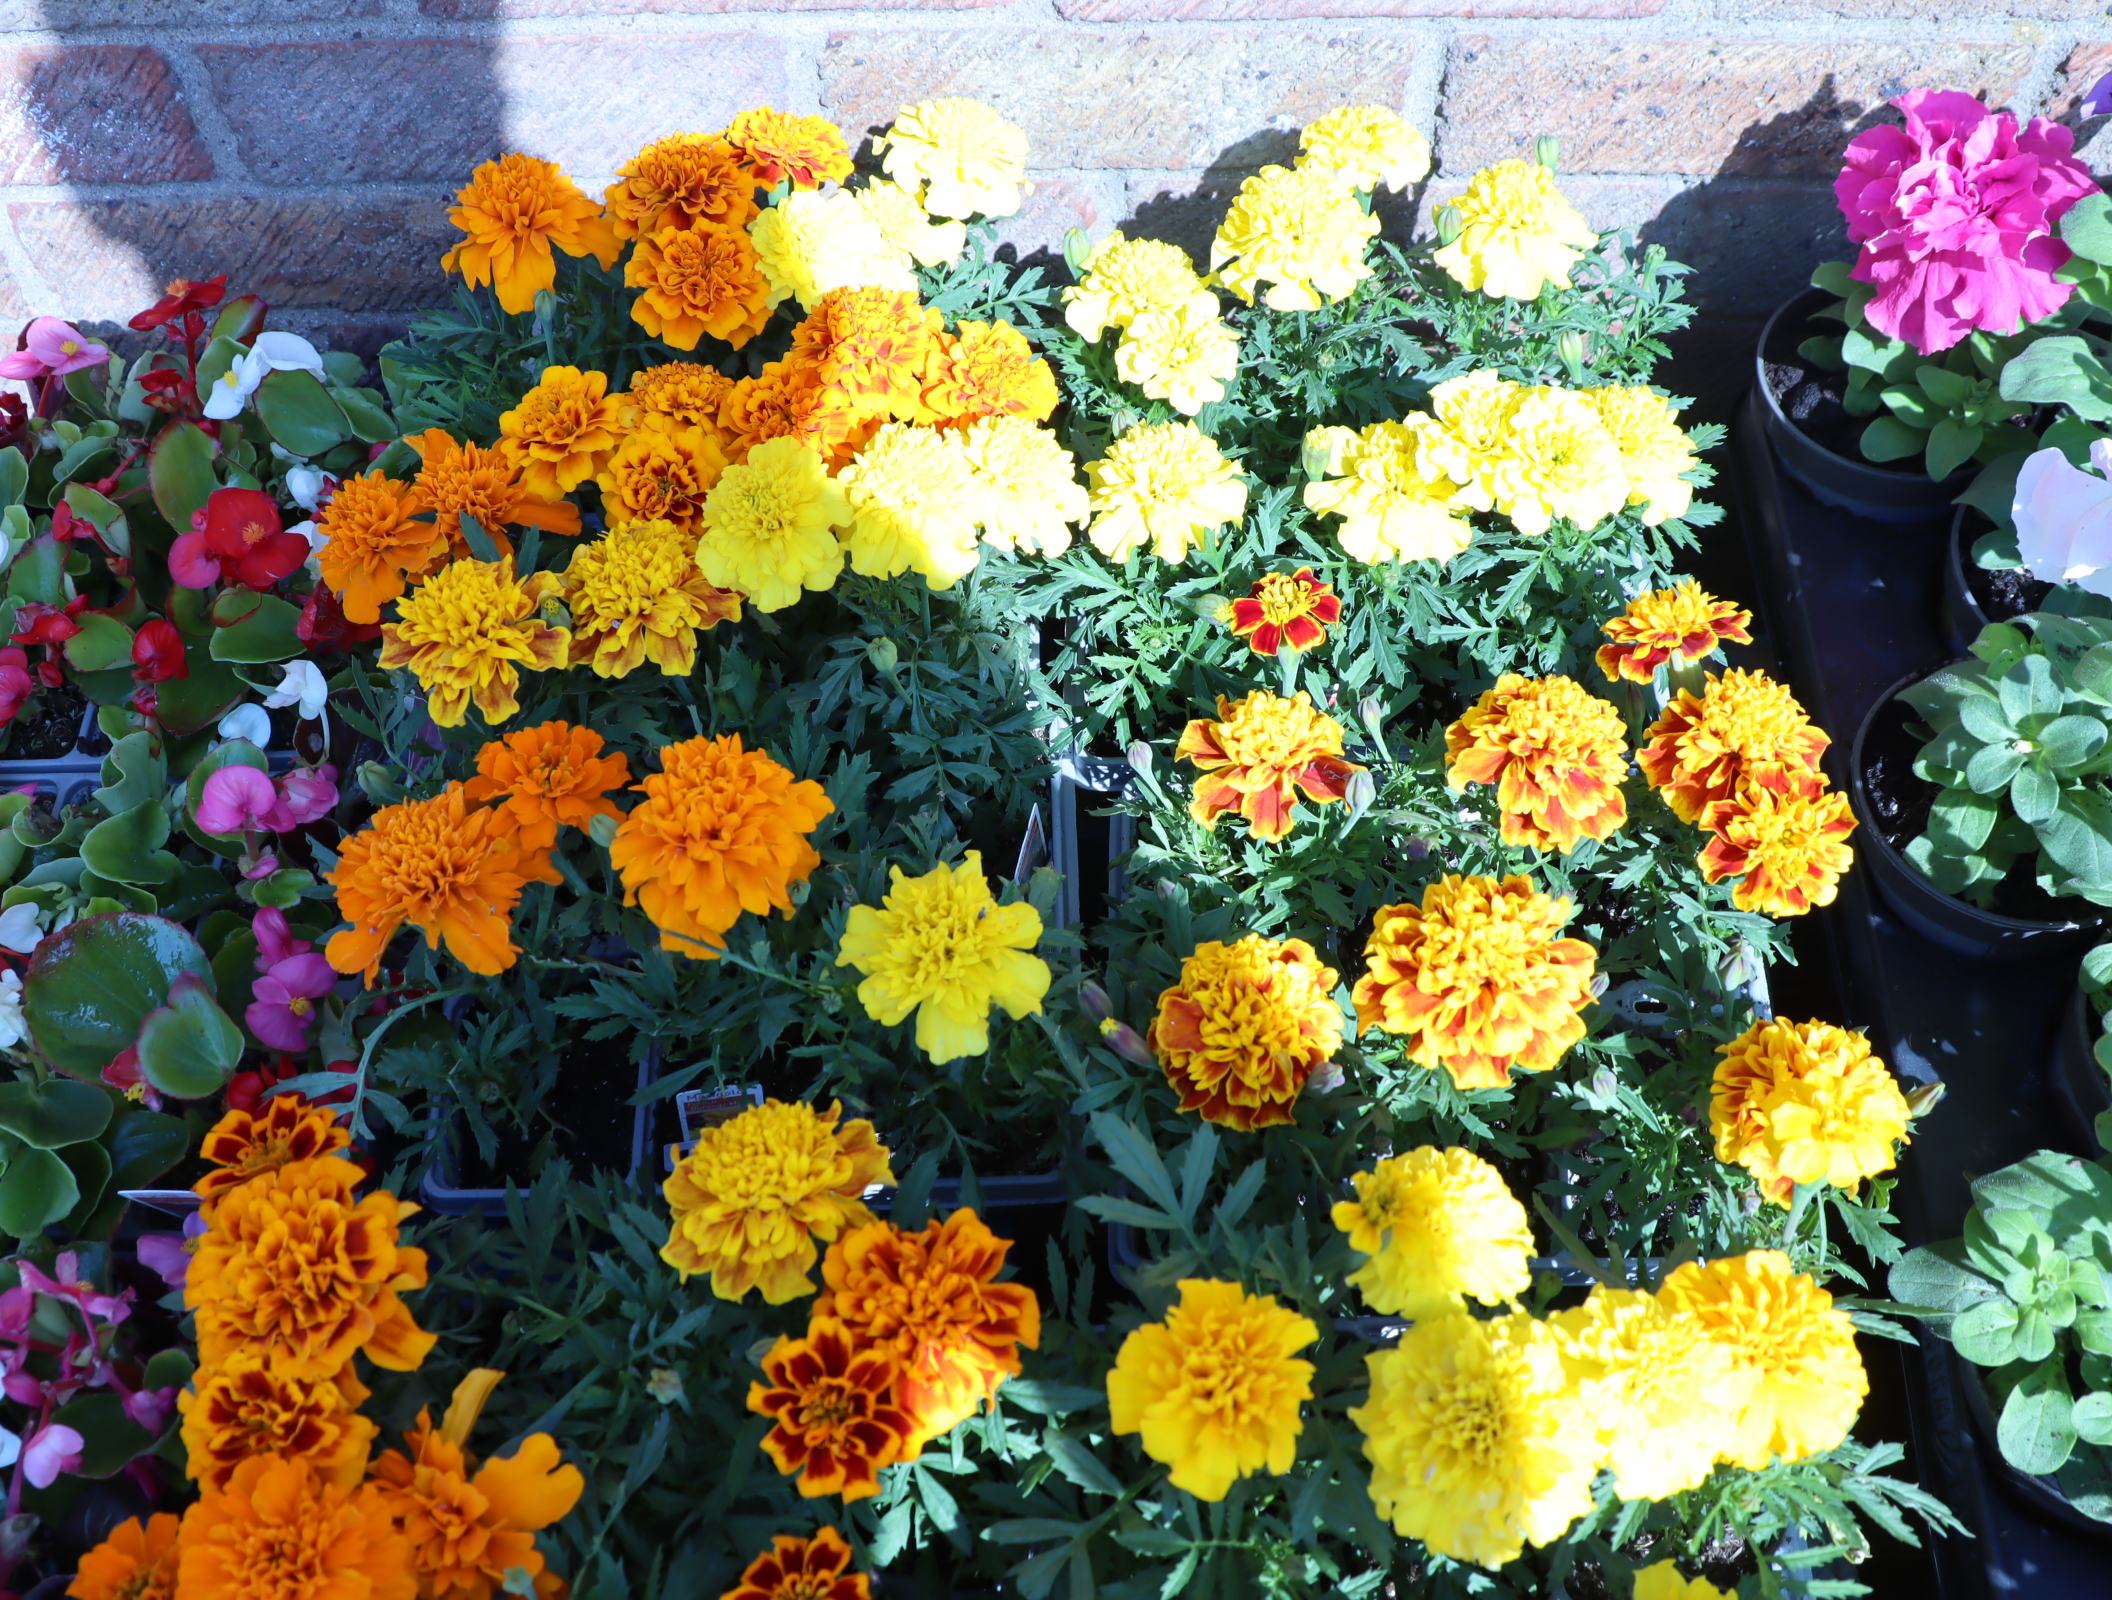 4 trays of African marigolds